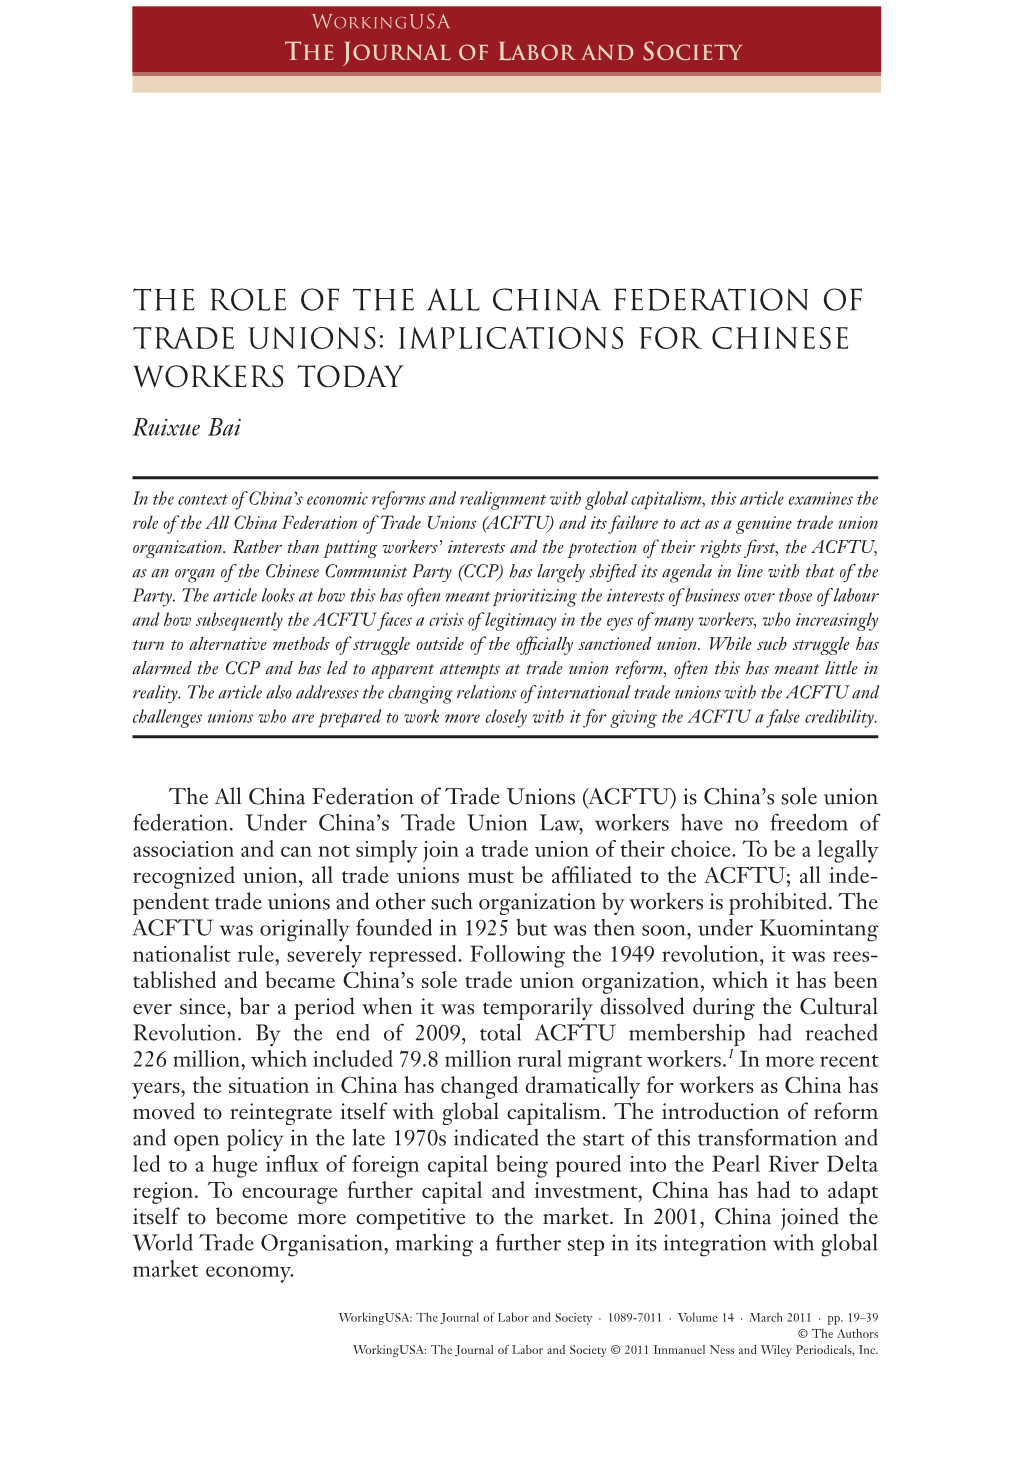 THE ROLE of the ALL CHINA FEDERATION of TRADE UNIONS: IMPLICATIONS for CHINESE WORKERS TODAY Wusa 318 19..40